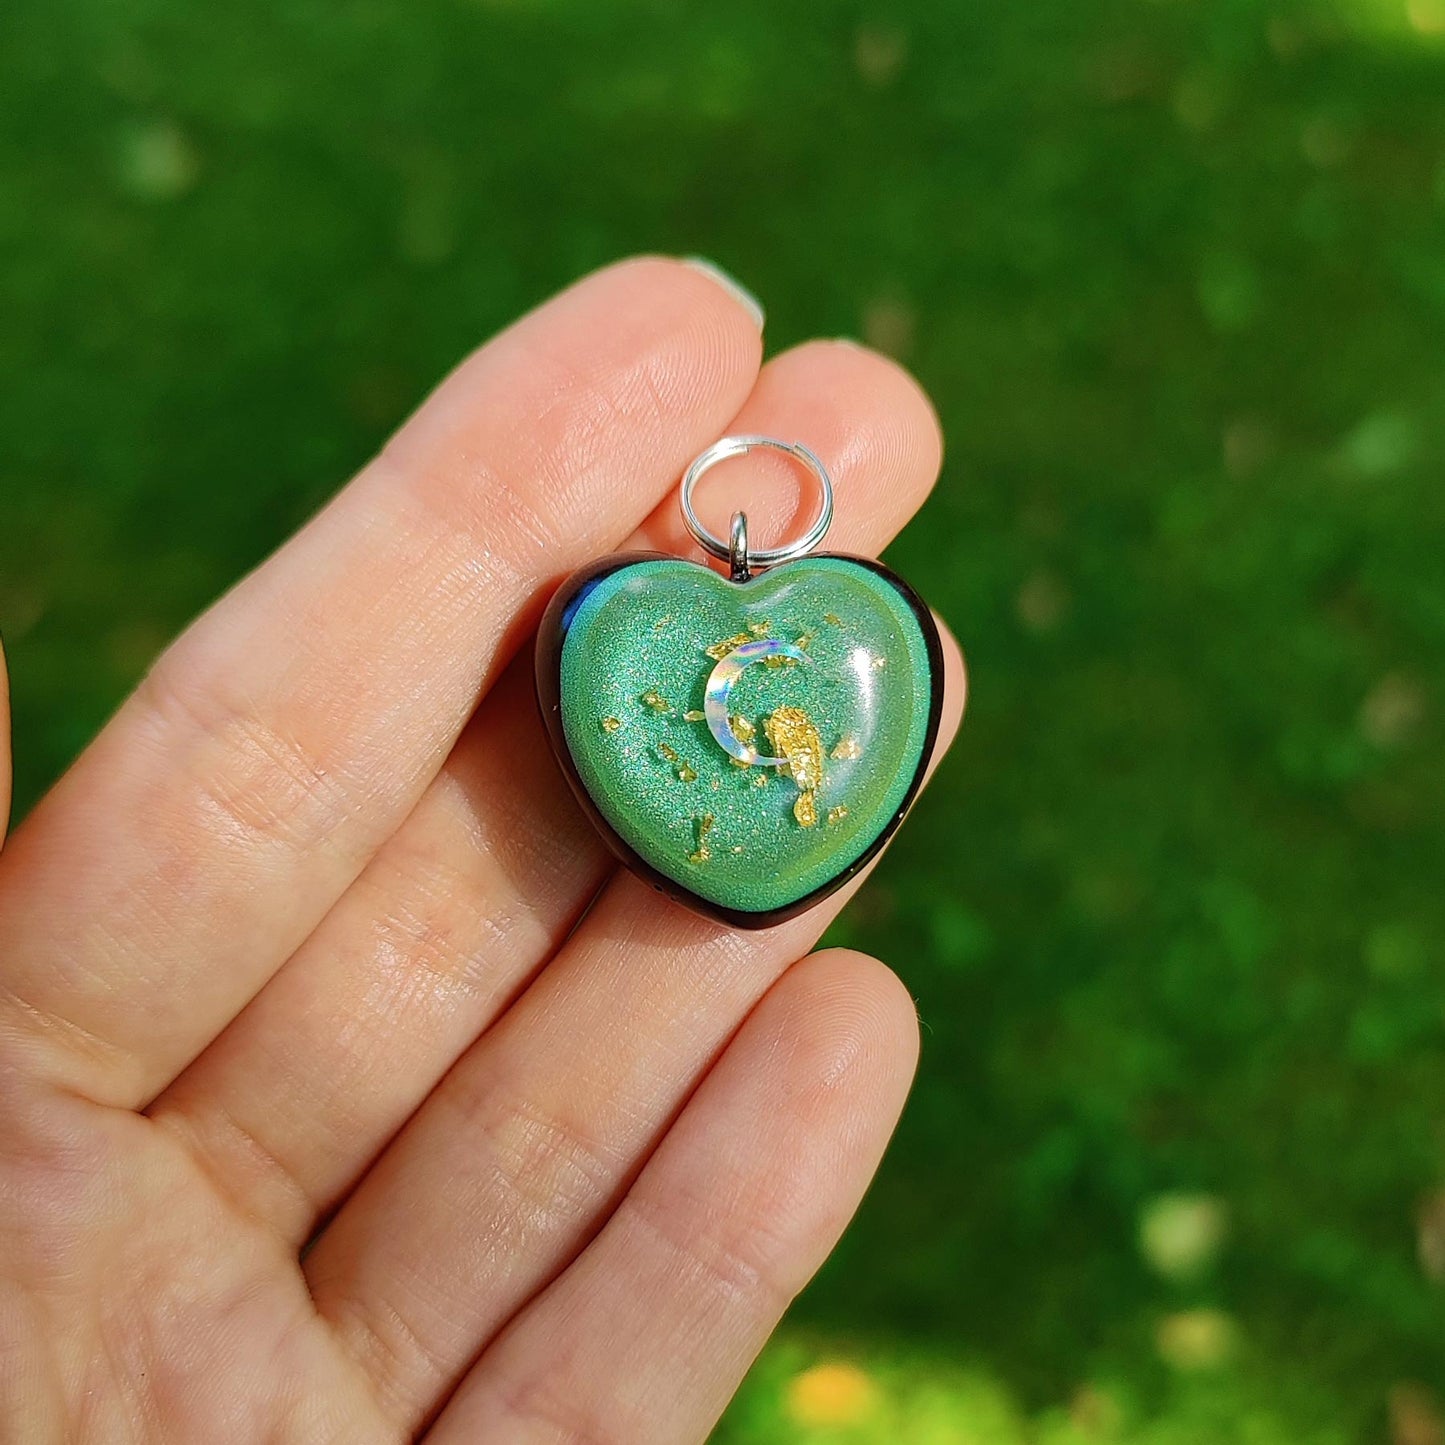 Kids or Pets Heart Shape Orgonite Necklace with Celestial Symbols For Heart (Anahata) Chakra